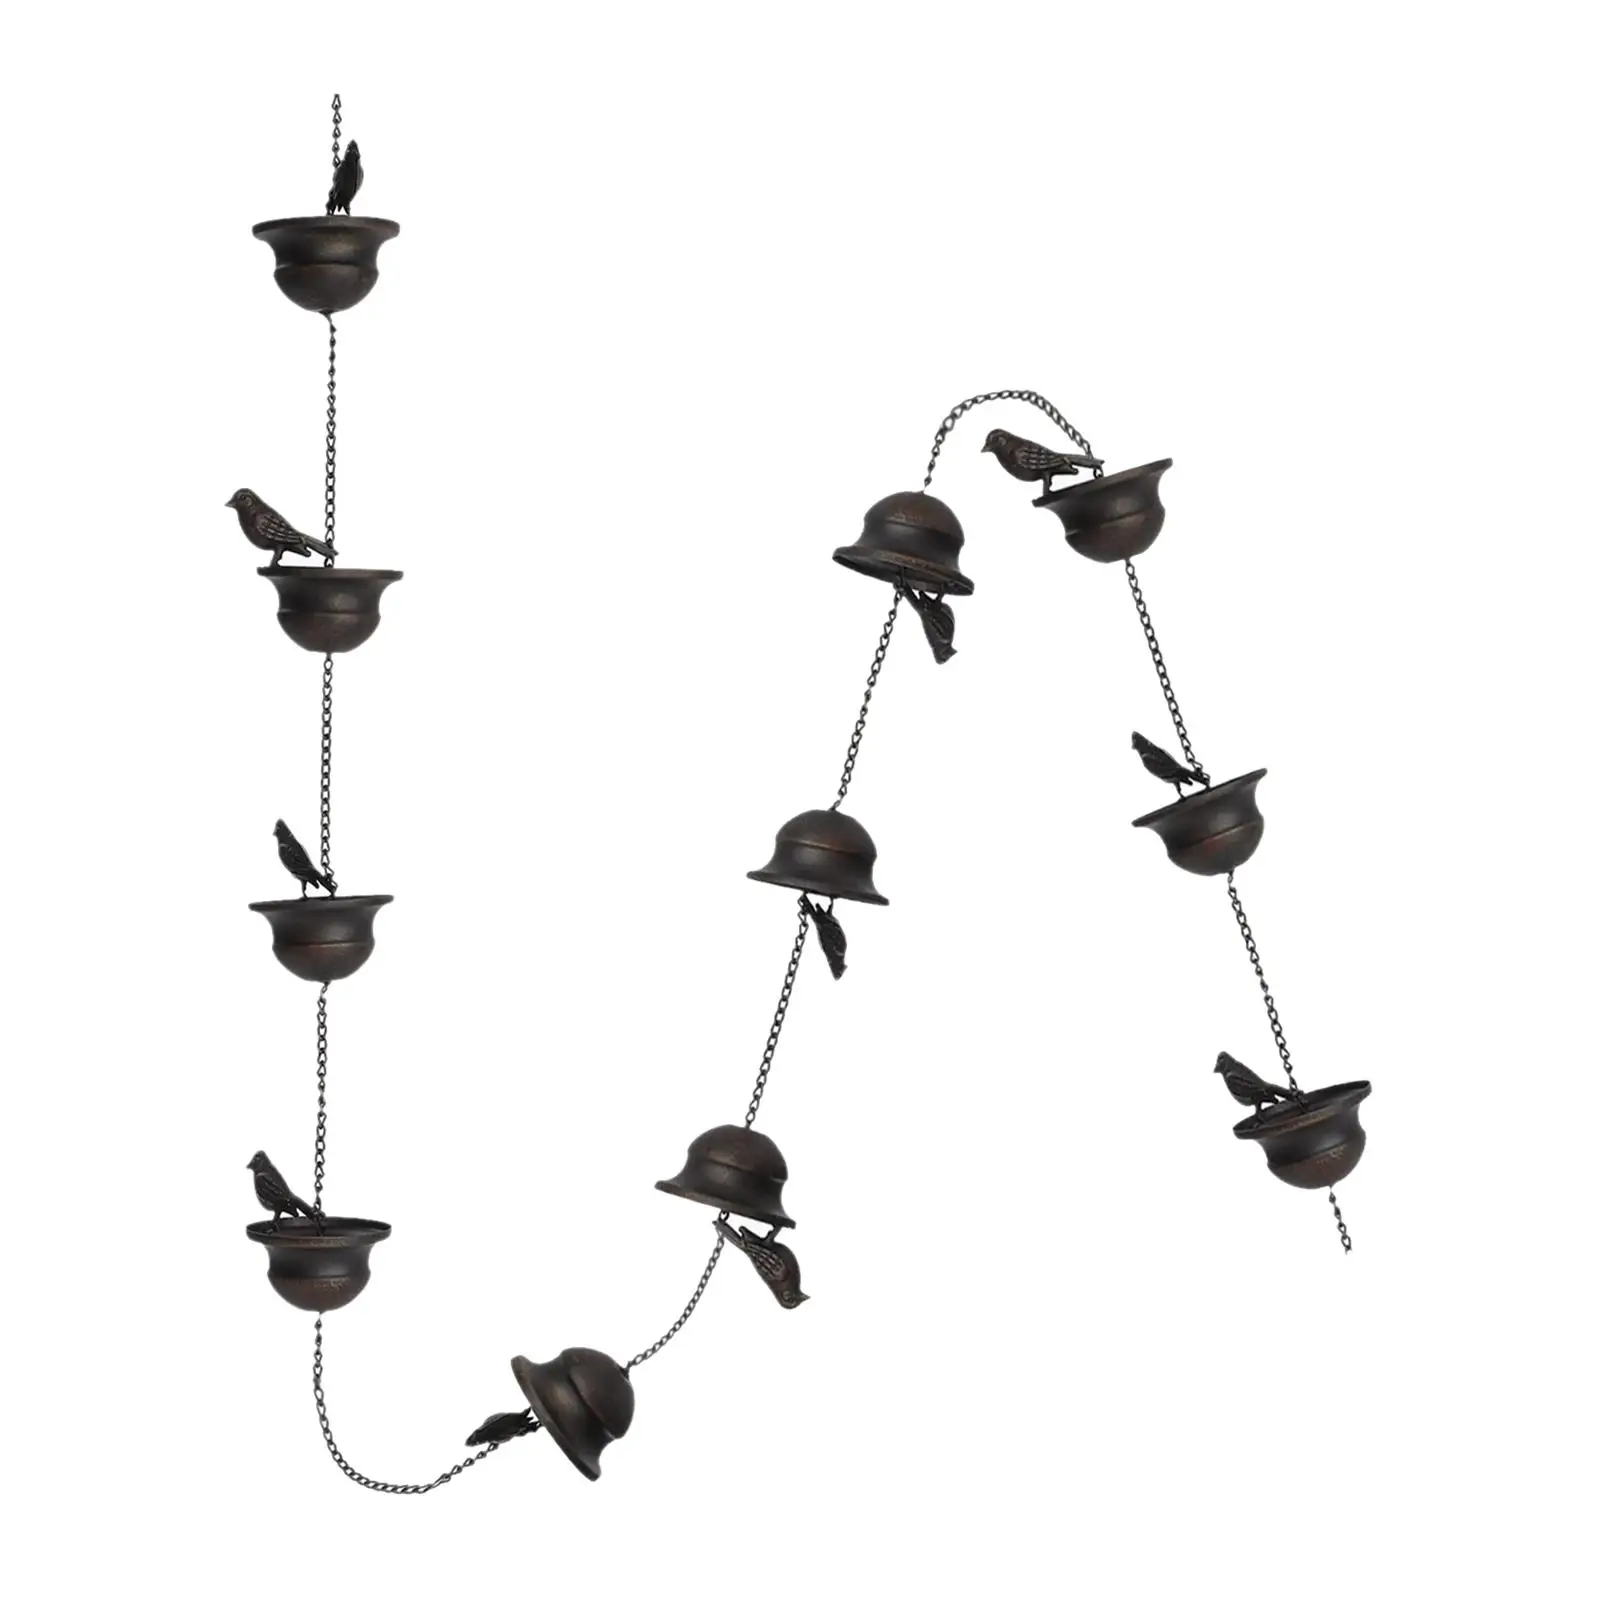 Bird Rain Chains for Gutters Replacement Downspouts Rain Collector Cups 94.5inch for Backyard Roofs Awnings Sheds Divert Water